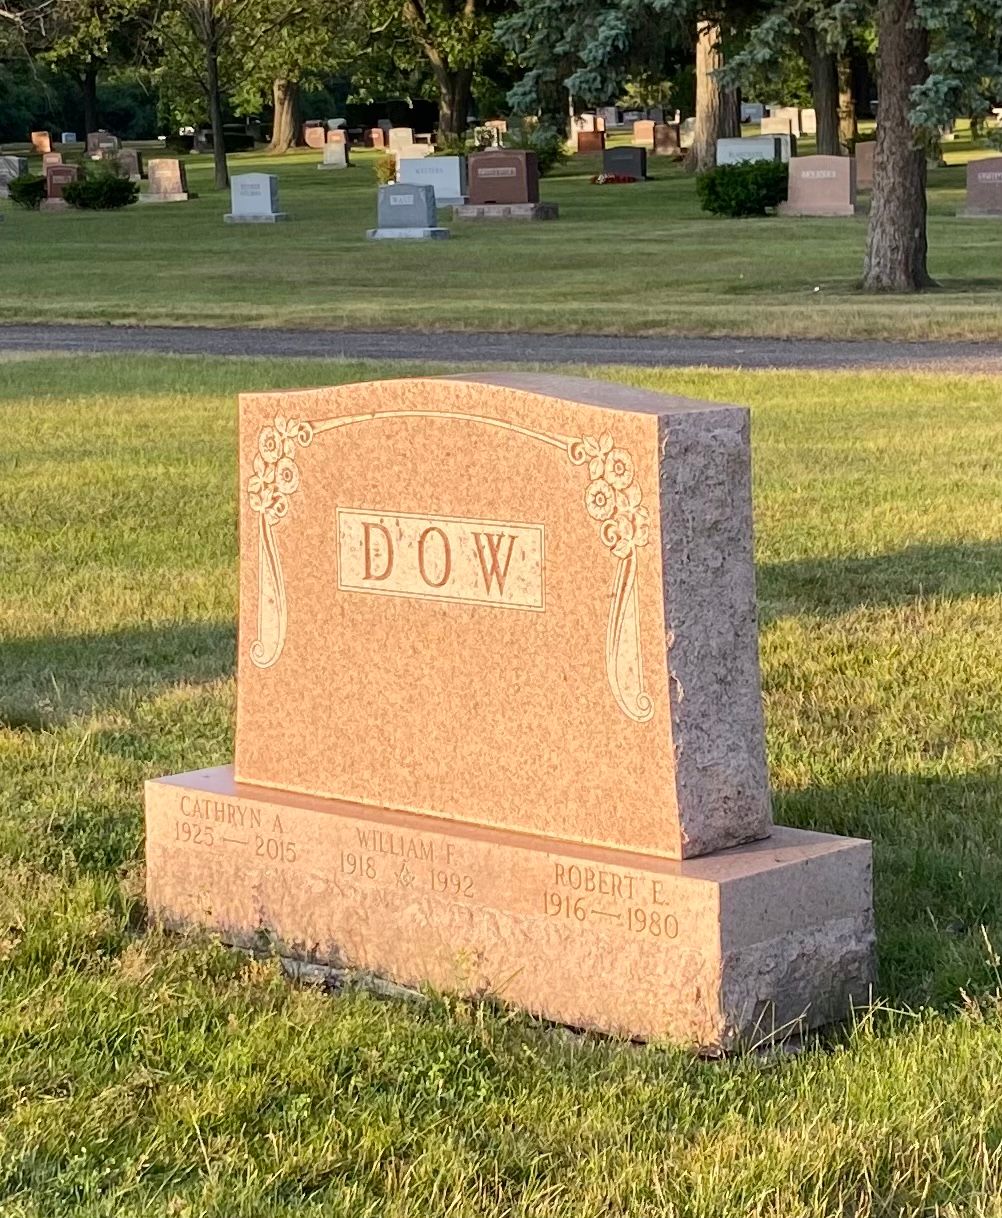 R. Dow (Grave)